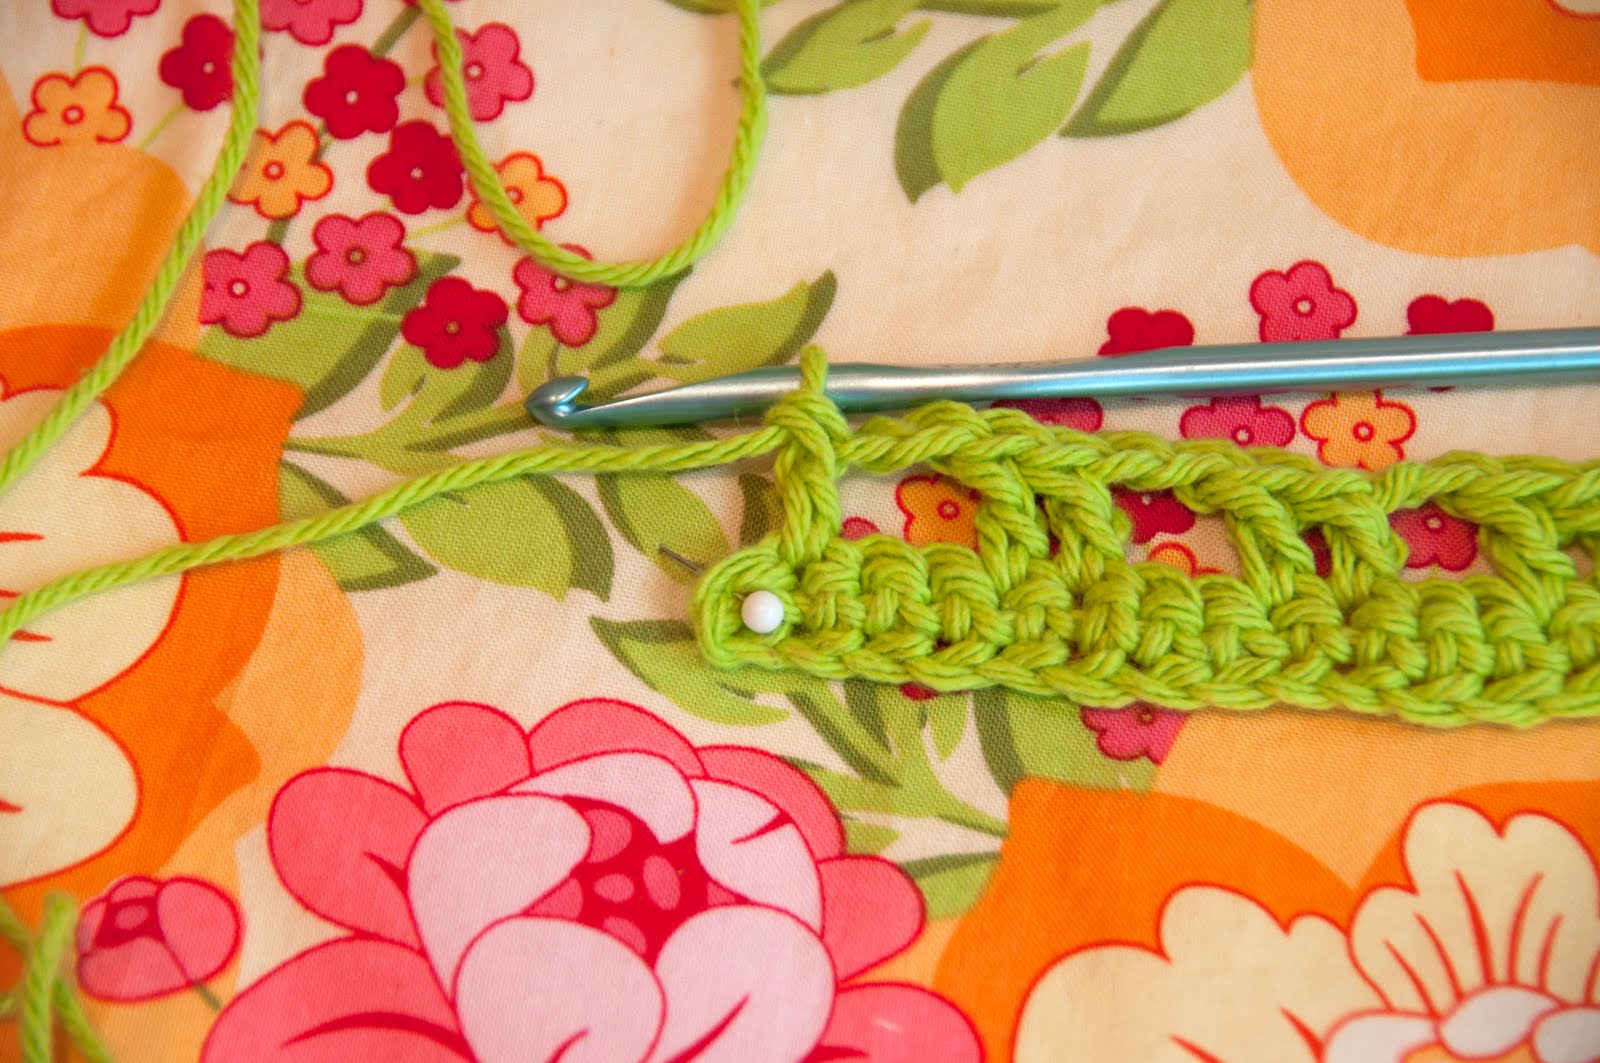 Aesthetic Nest: HOH in Crochet: The Supplies (Giveaway for Crafter's Tool  Butler-CLOSED)